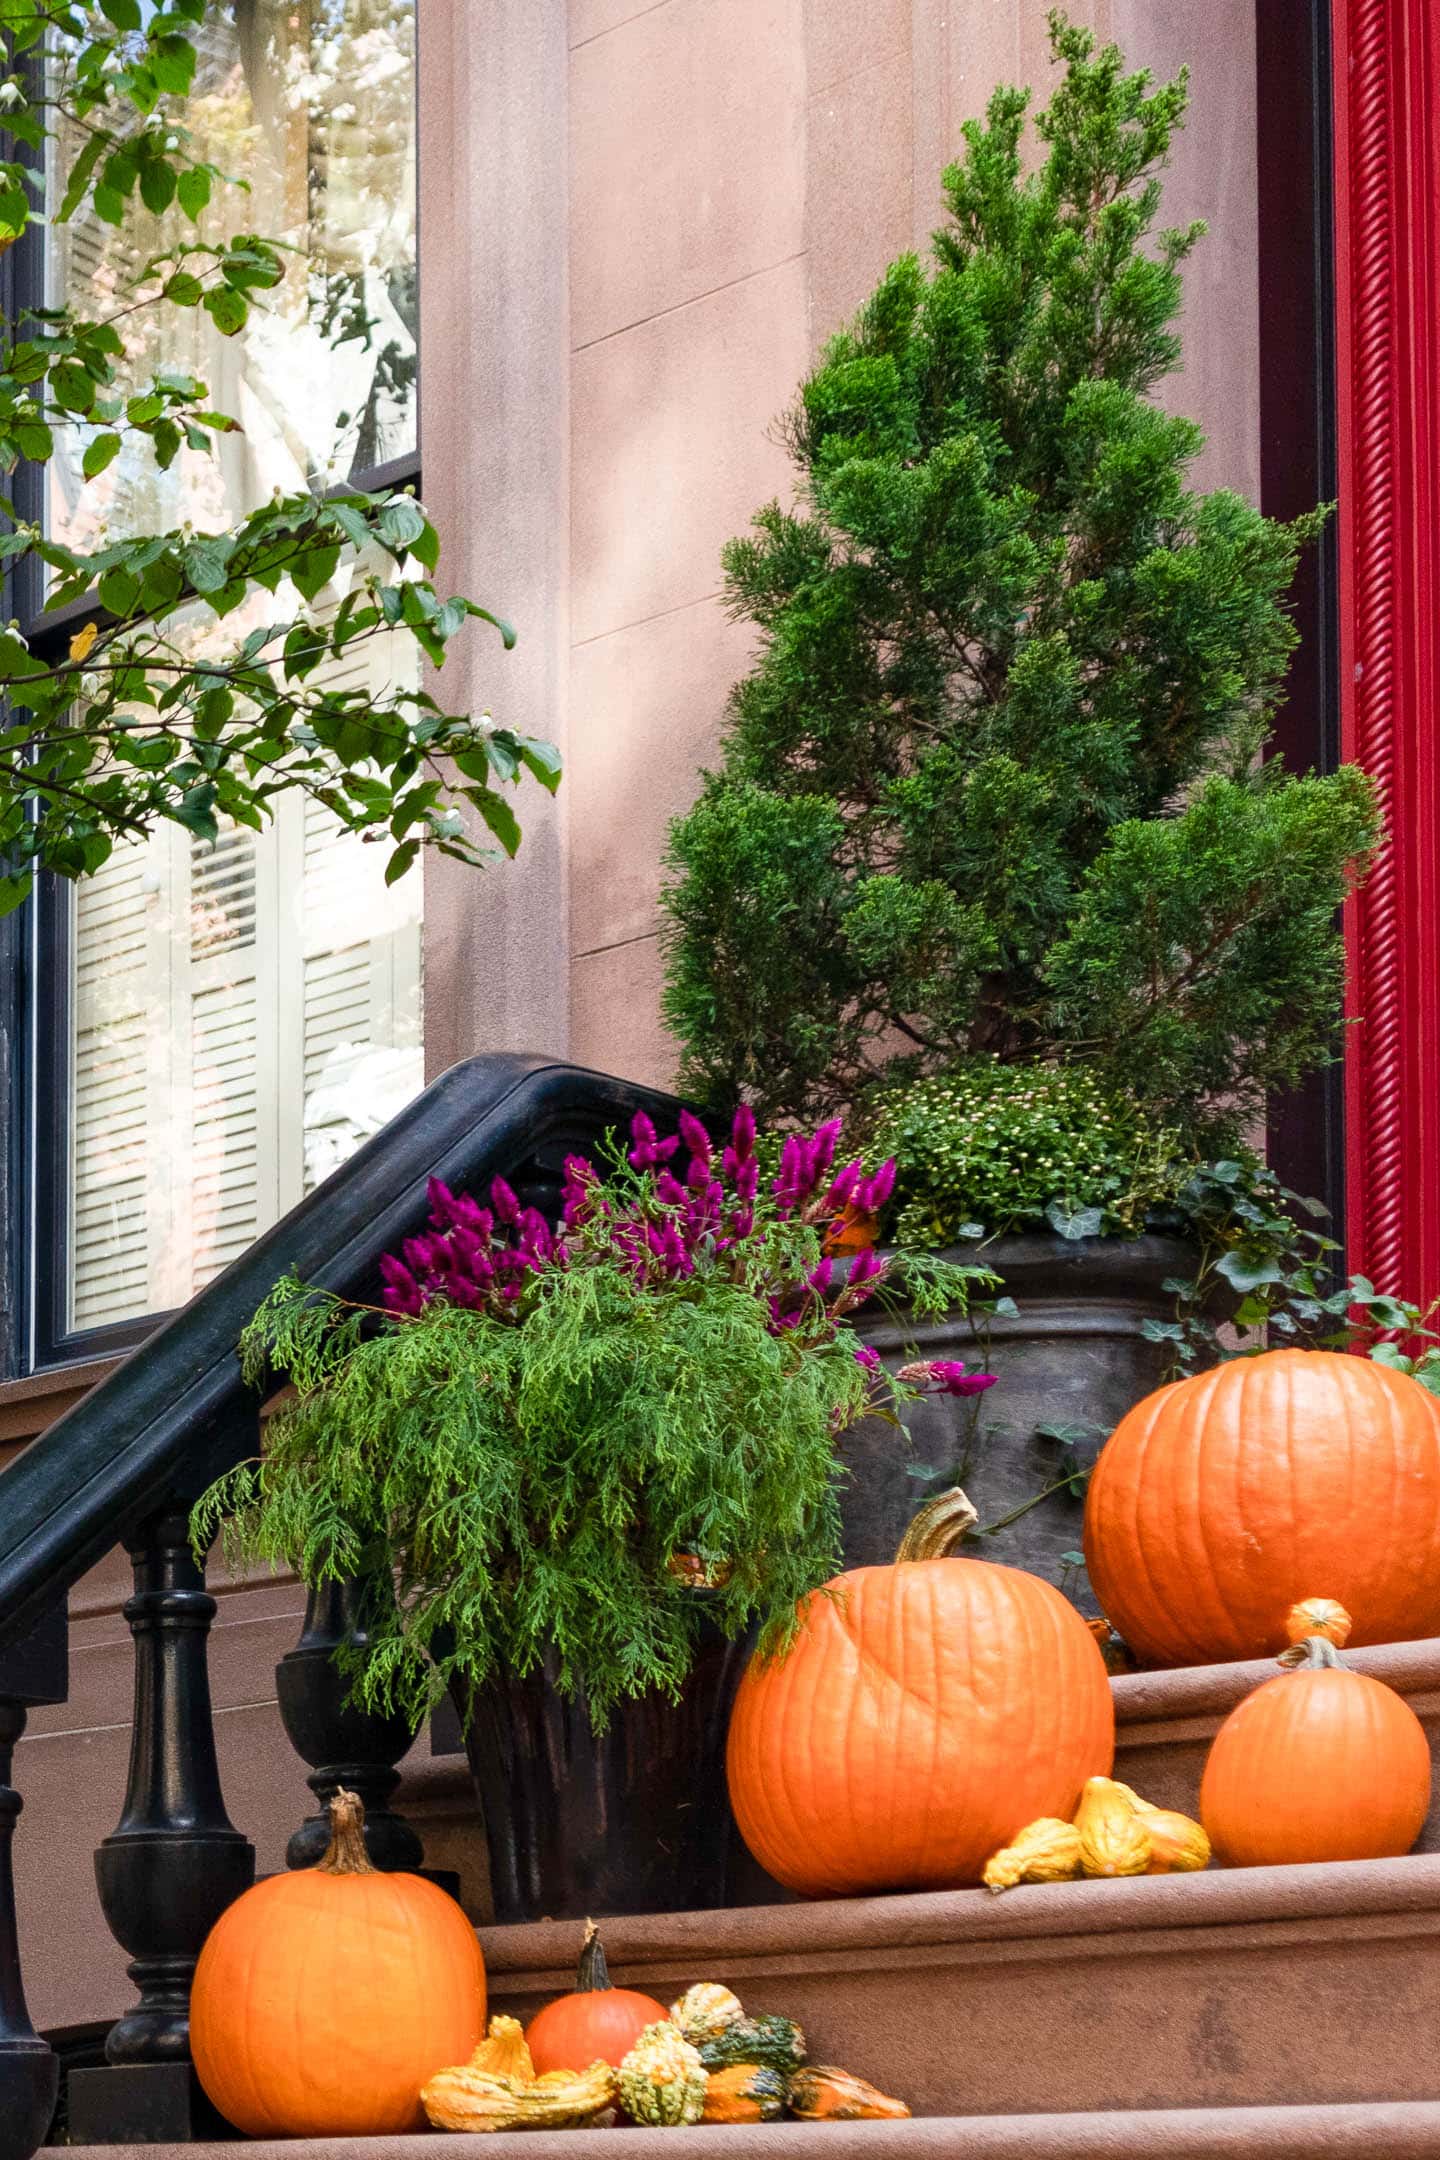 Fall planters with evergreens, mums, Celosia and ivy on the steps with pumpkins and gourds